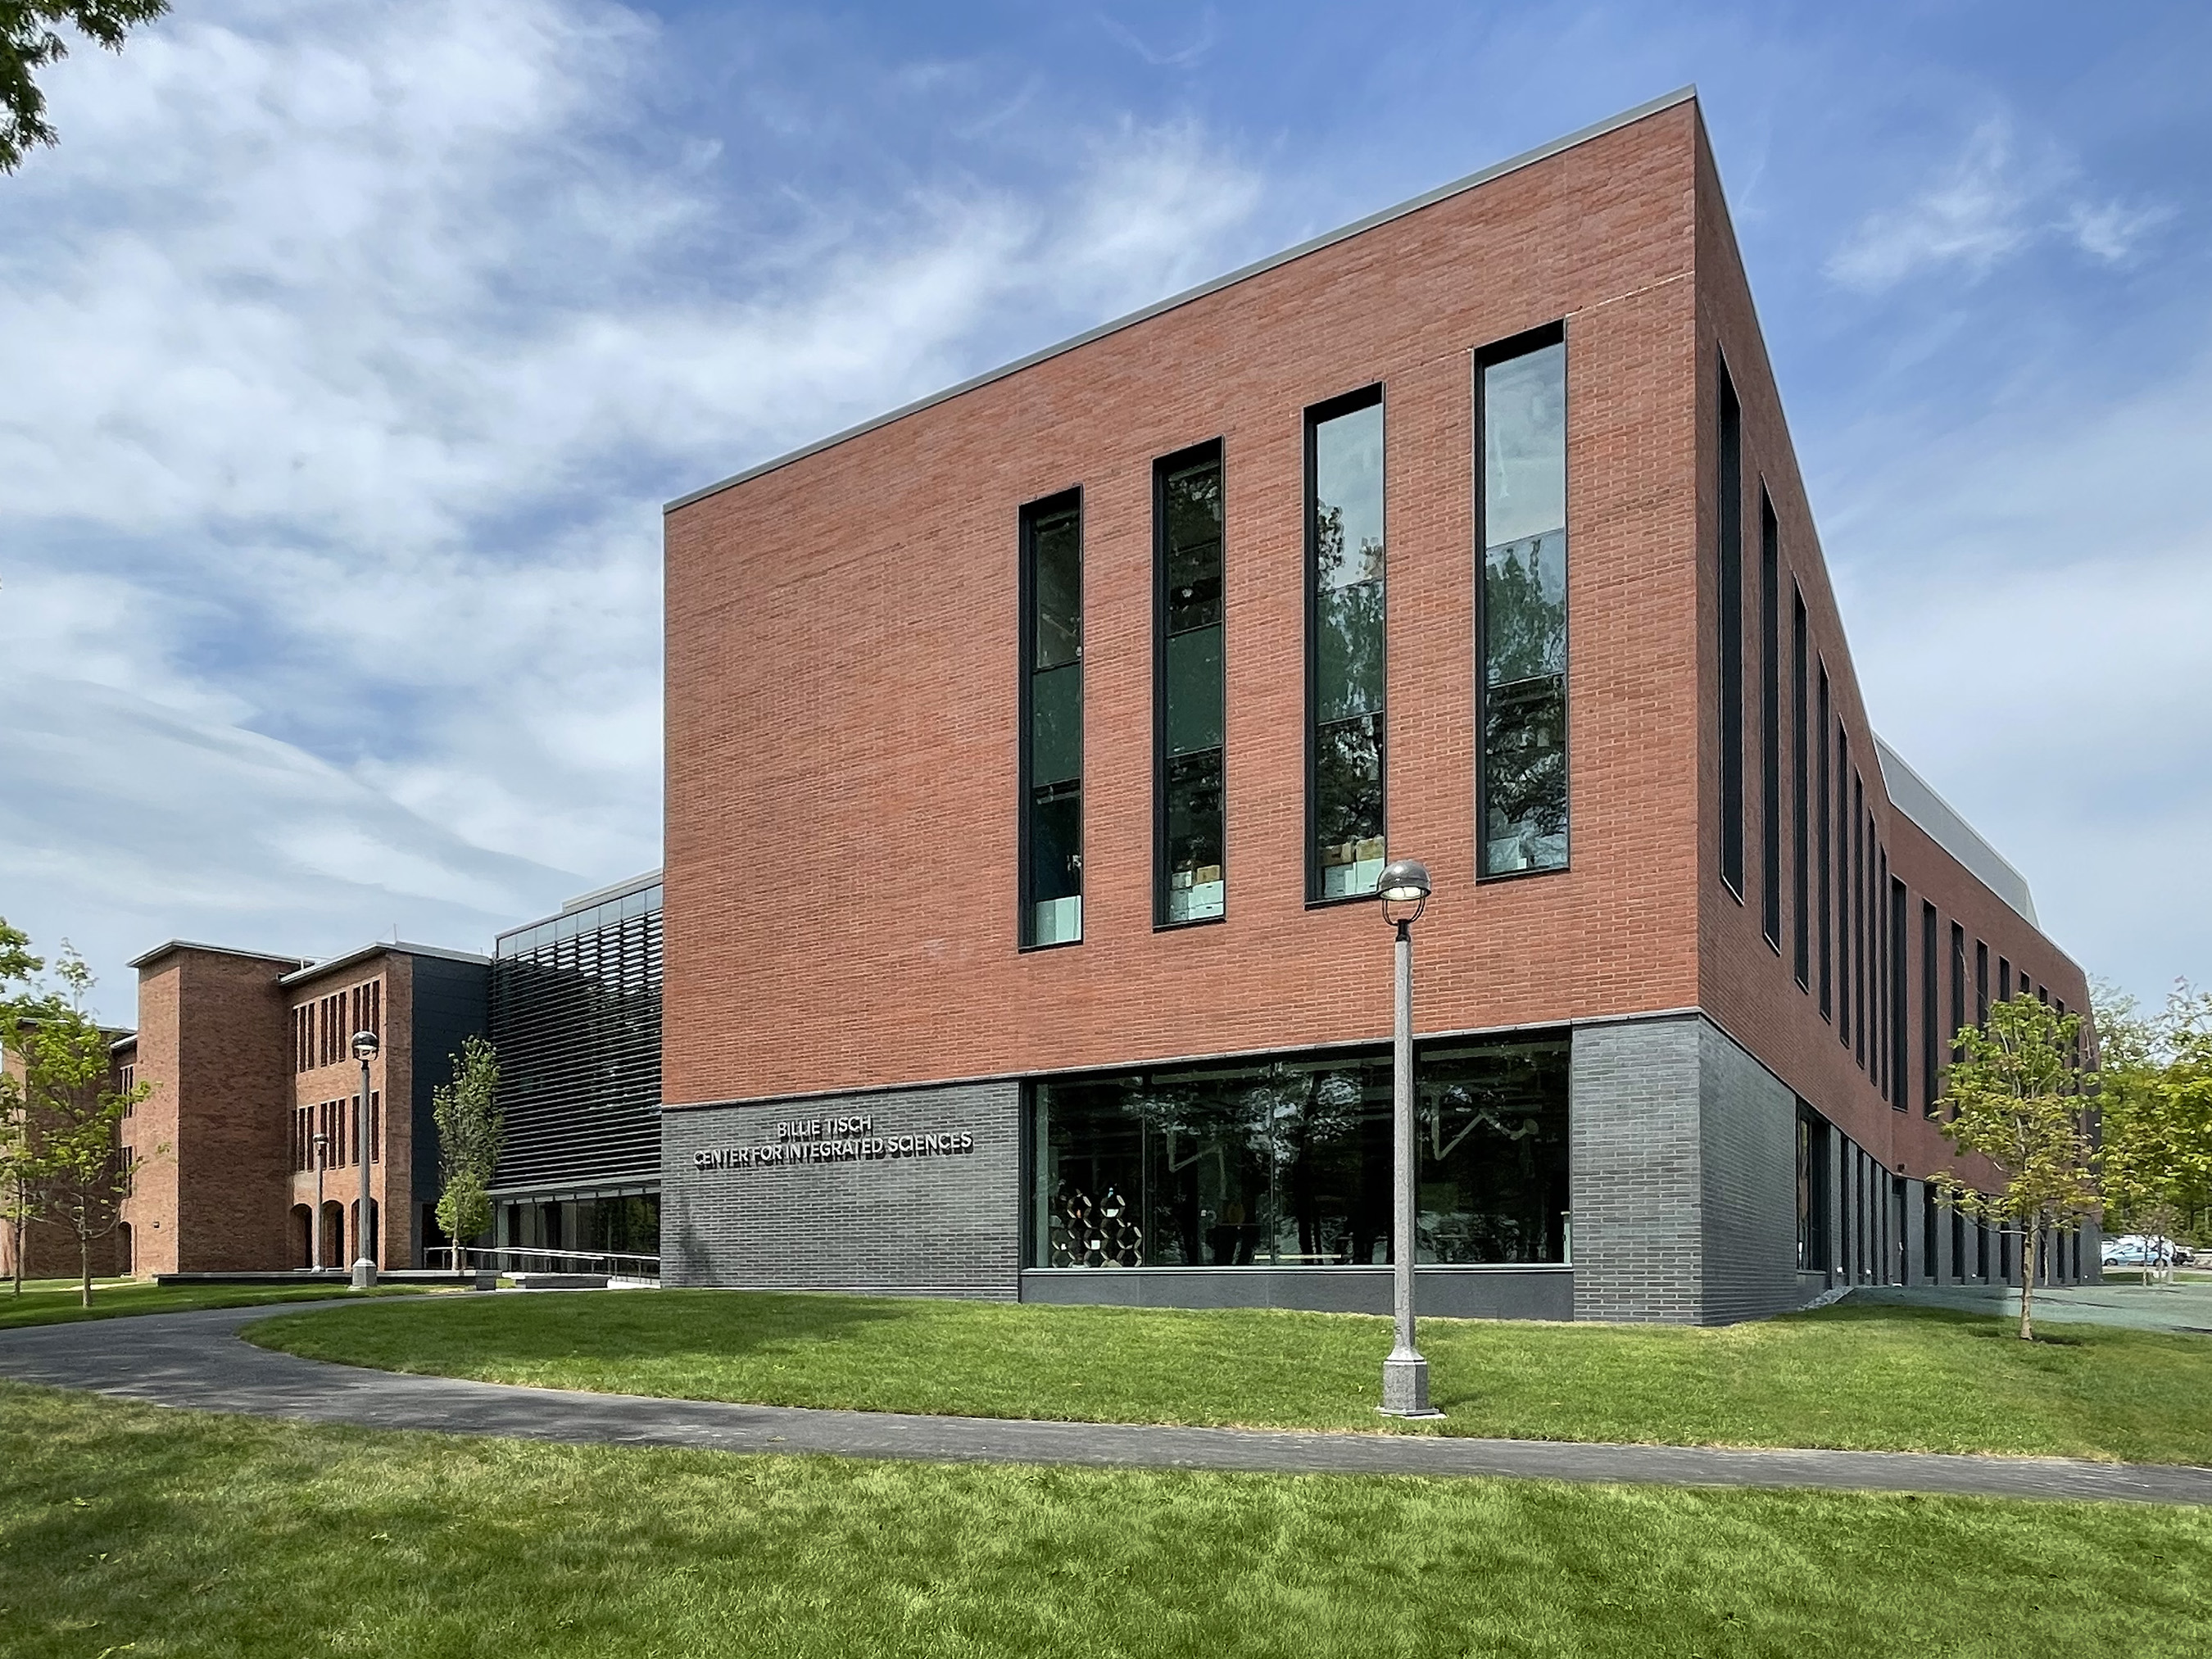 The Bille Tisch Center for Integrated Sciences